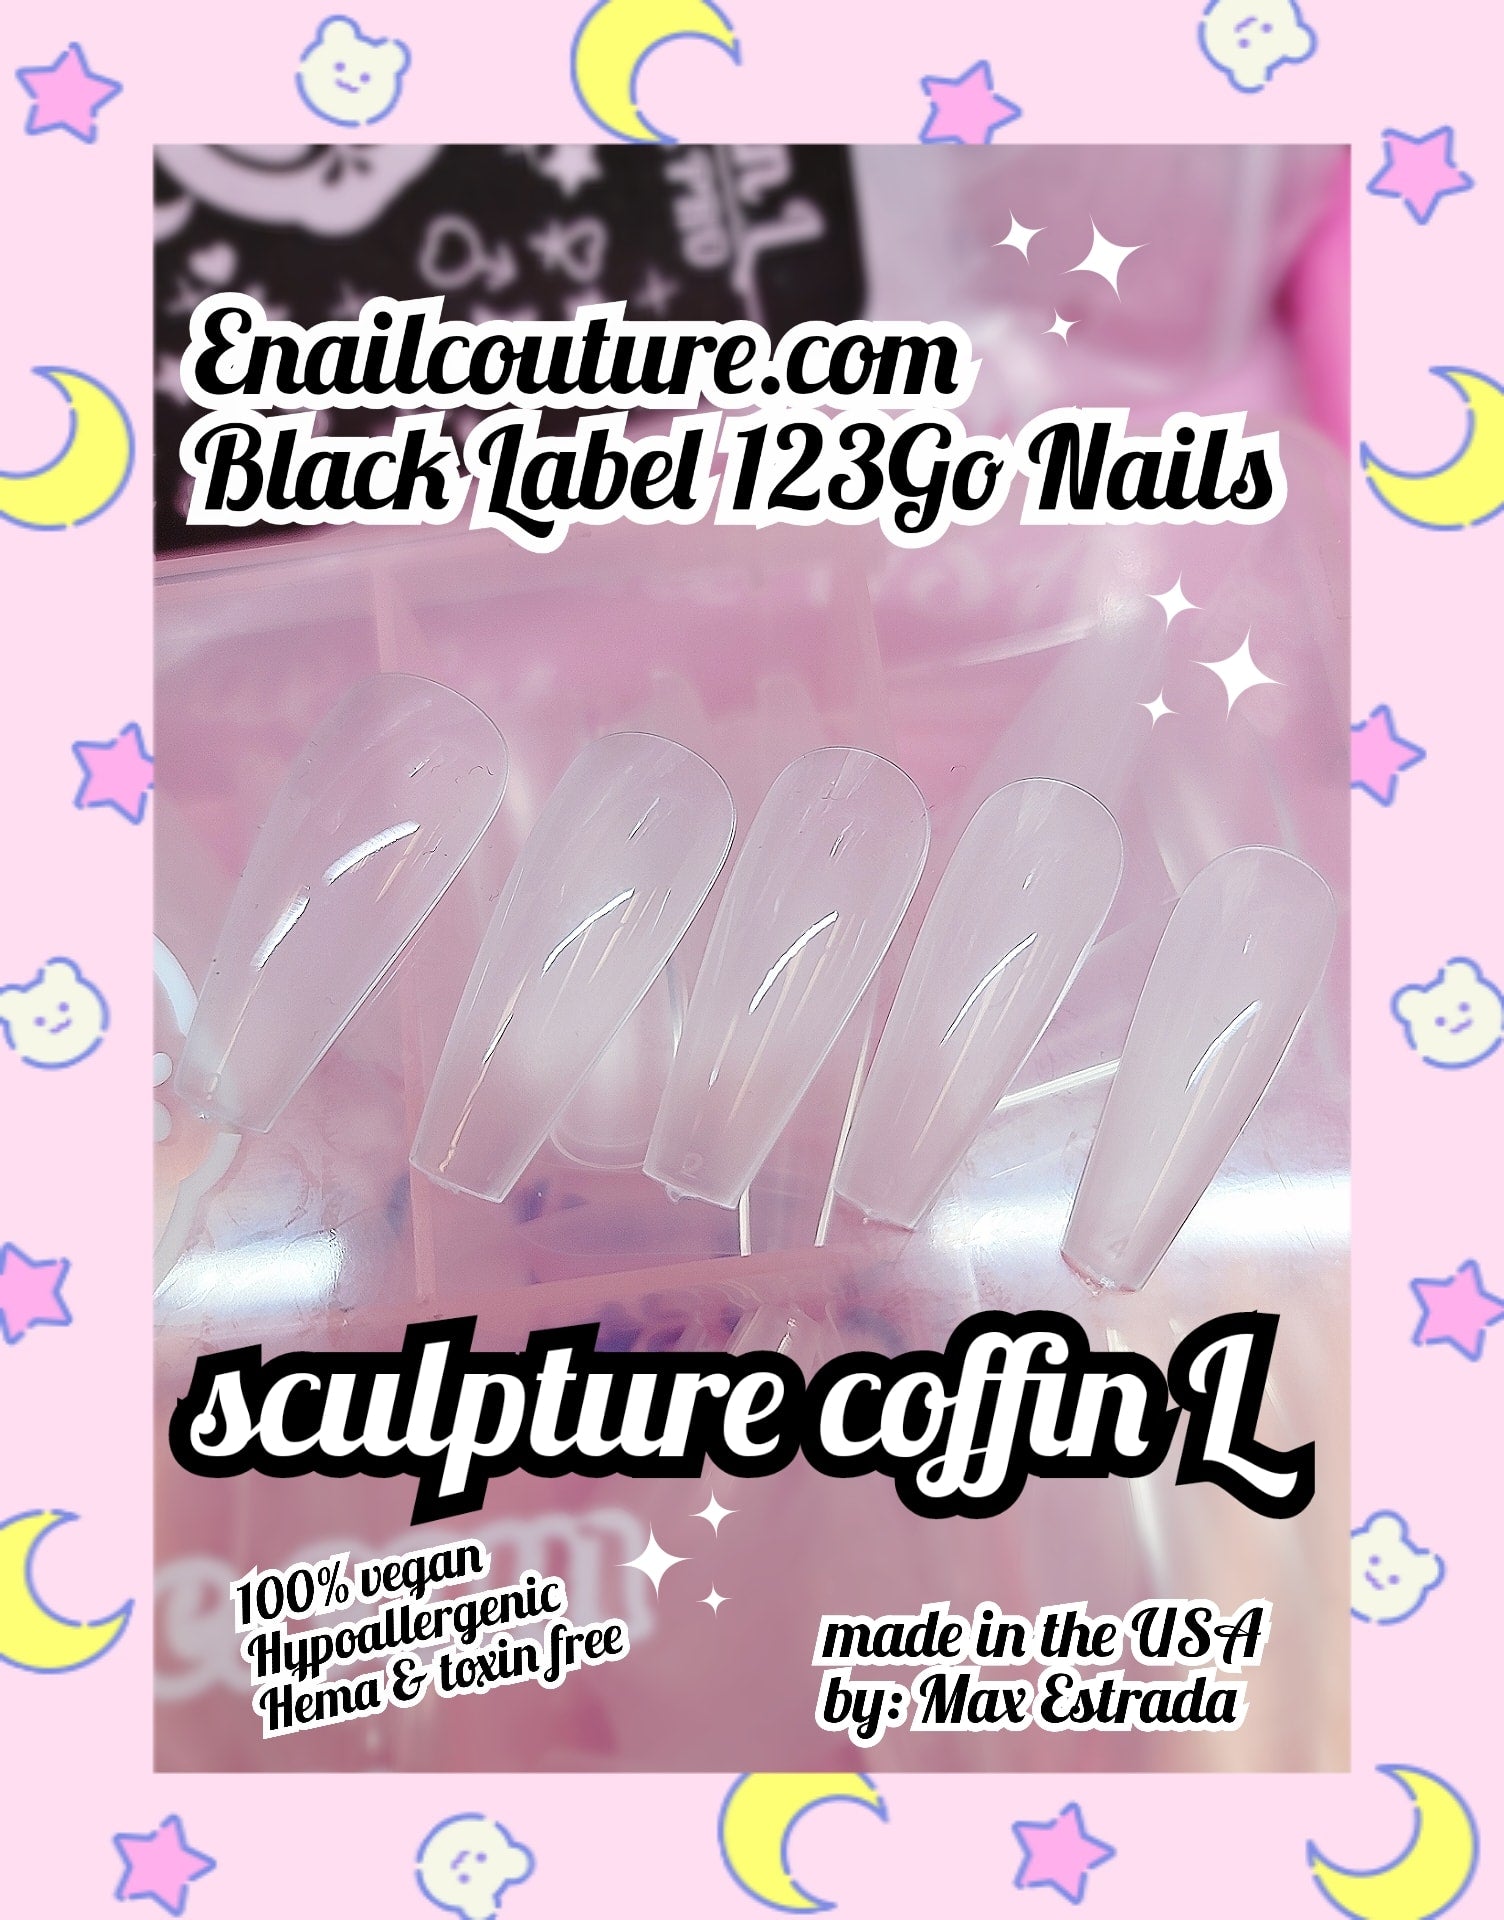 123go Black Label Nails Sculpture Coffin L (Soft Gel Nail Tips- Clear Cover Full Nail Extensions - Pre-shaped Acrylic False Gelly Nail Tips 15 Sizes for DIY Salon Nail Extensions)